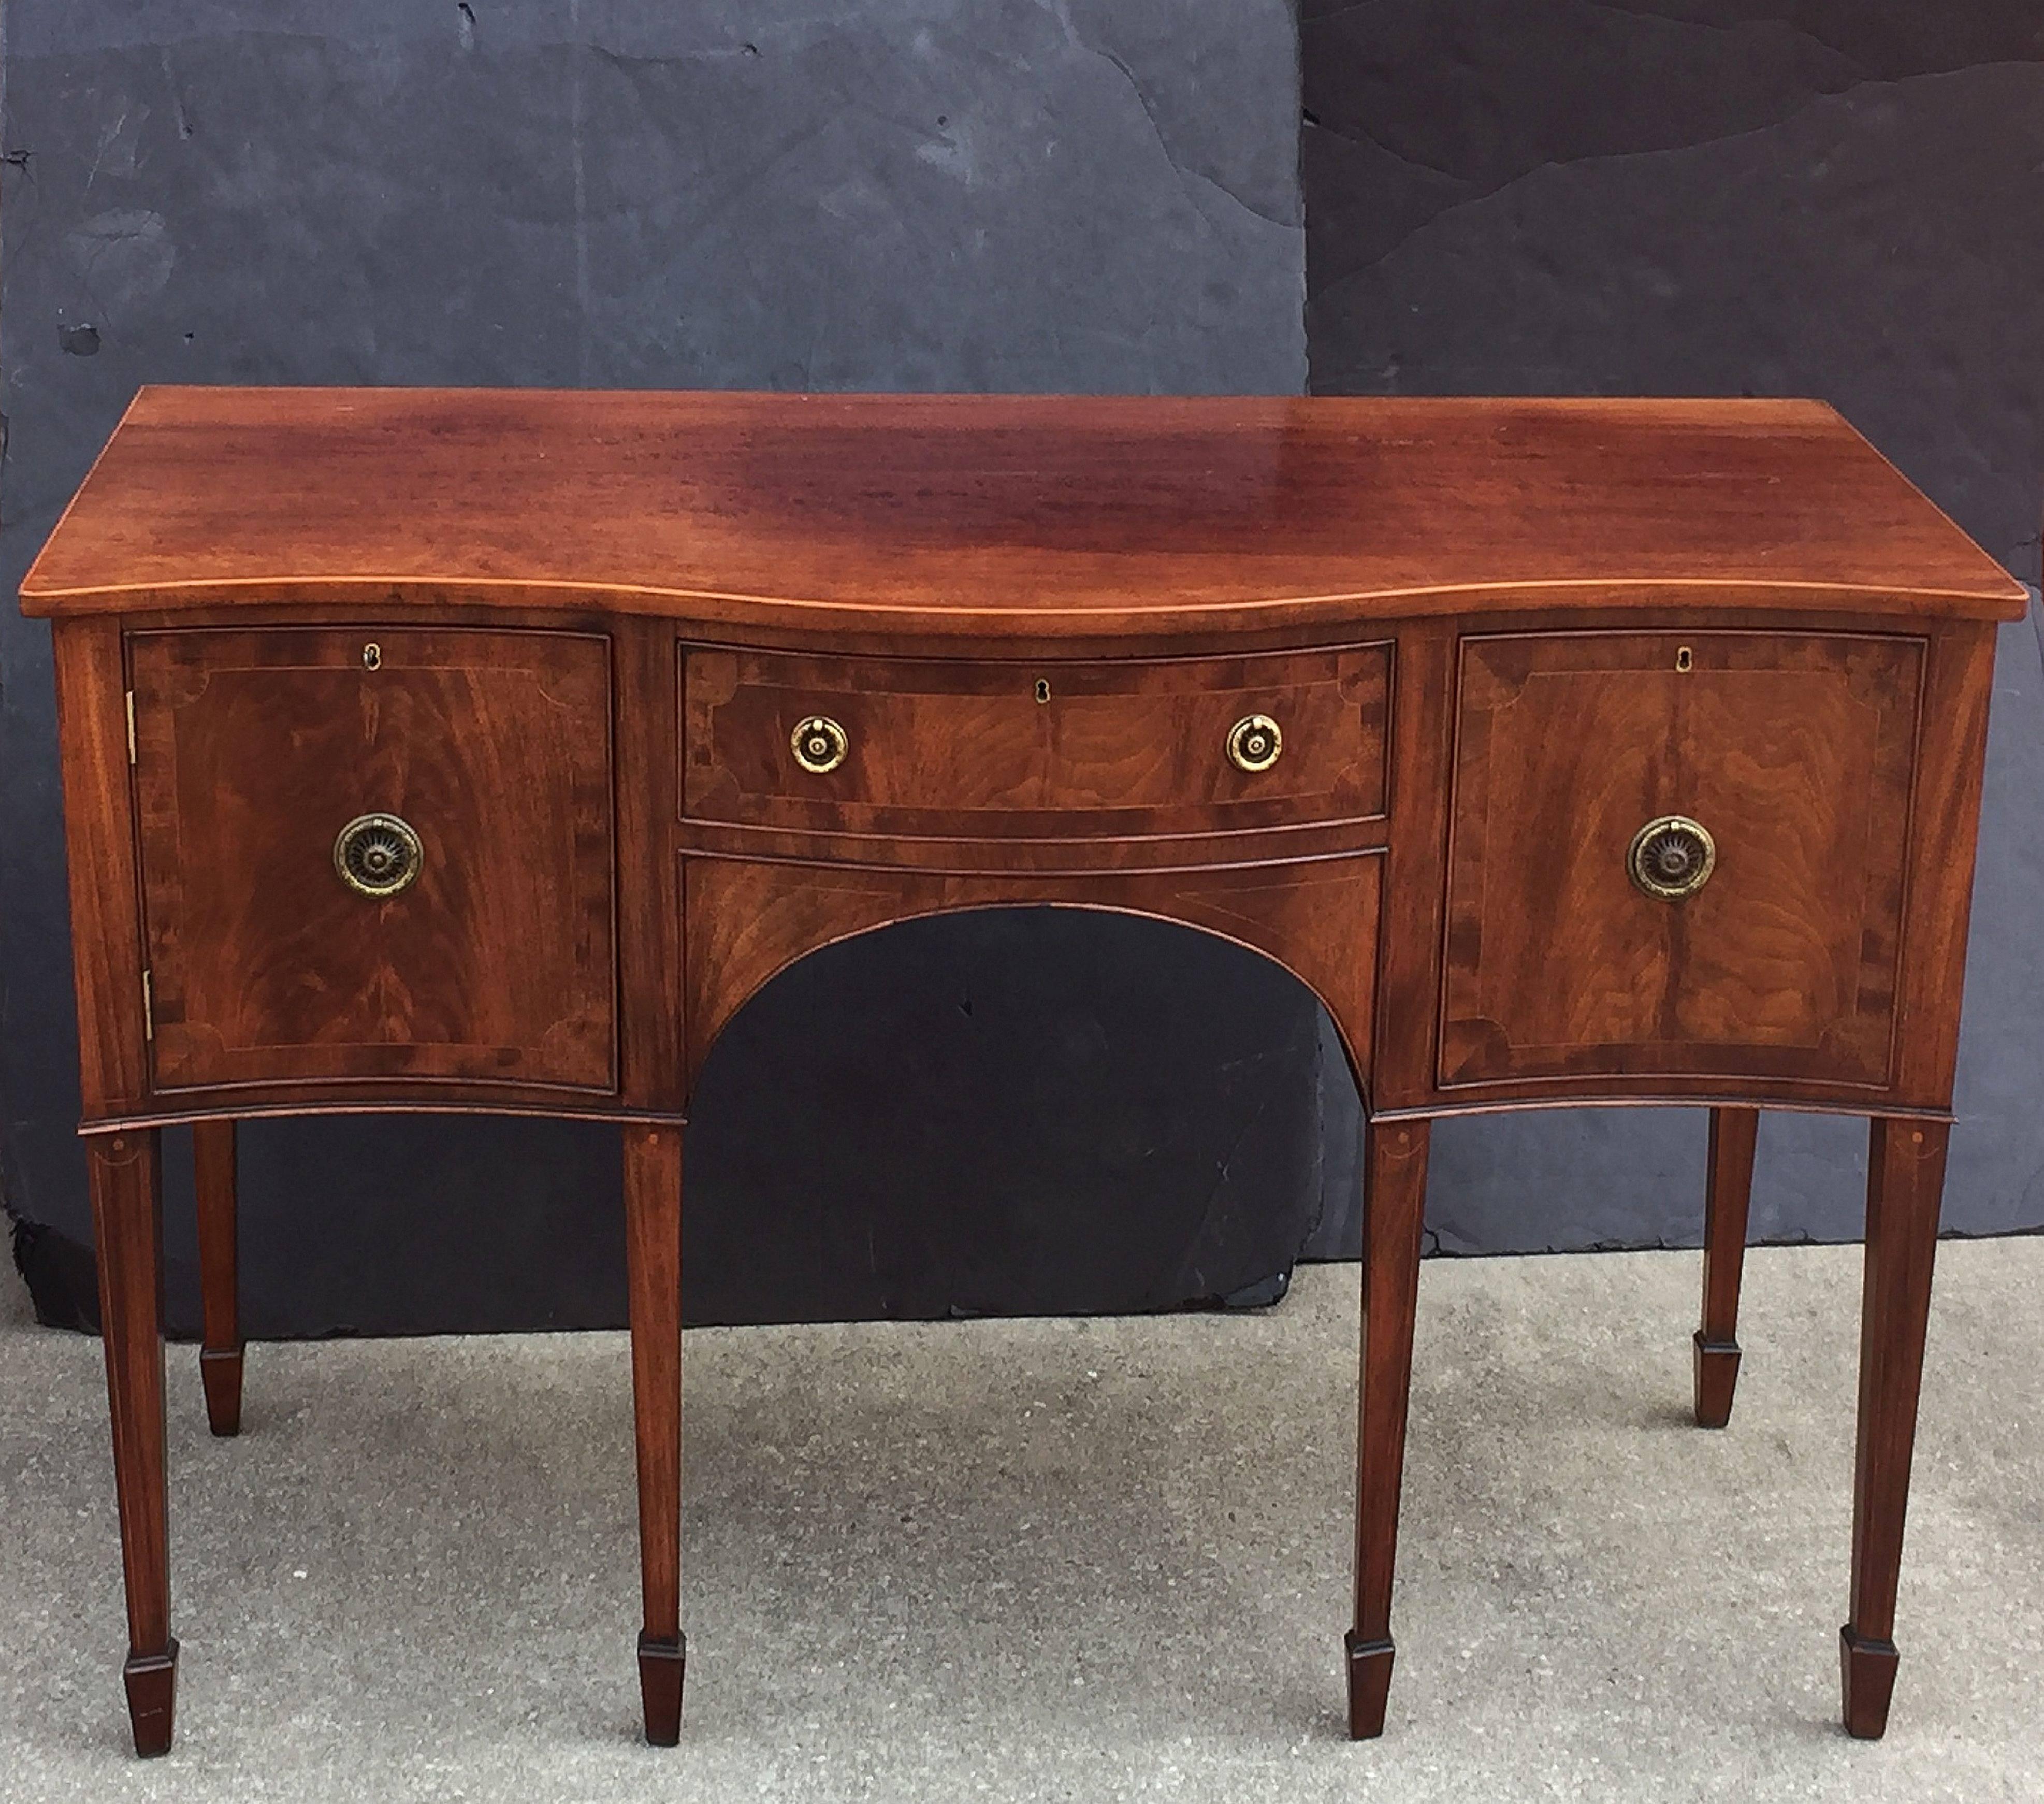 A handsome English sideboard server ‘or serving console’ in the Sheraton style, featuring a bowed moulded top, over an inlaid flame mahogany frieze with one left-facing cabinet door, bowed middle large drawer with felted interior compartments, and